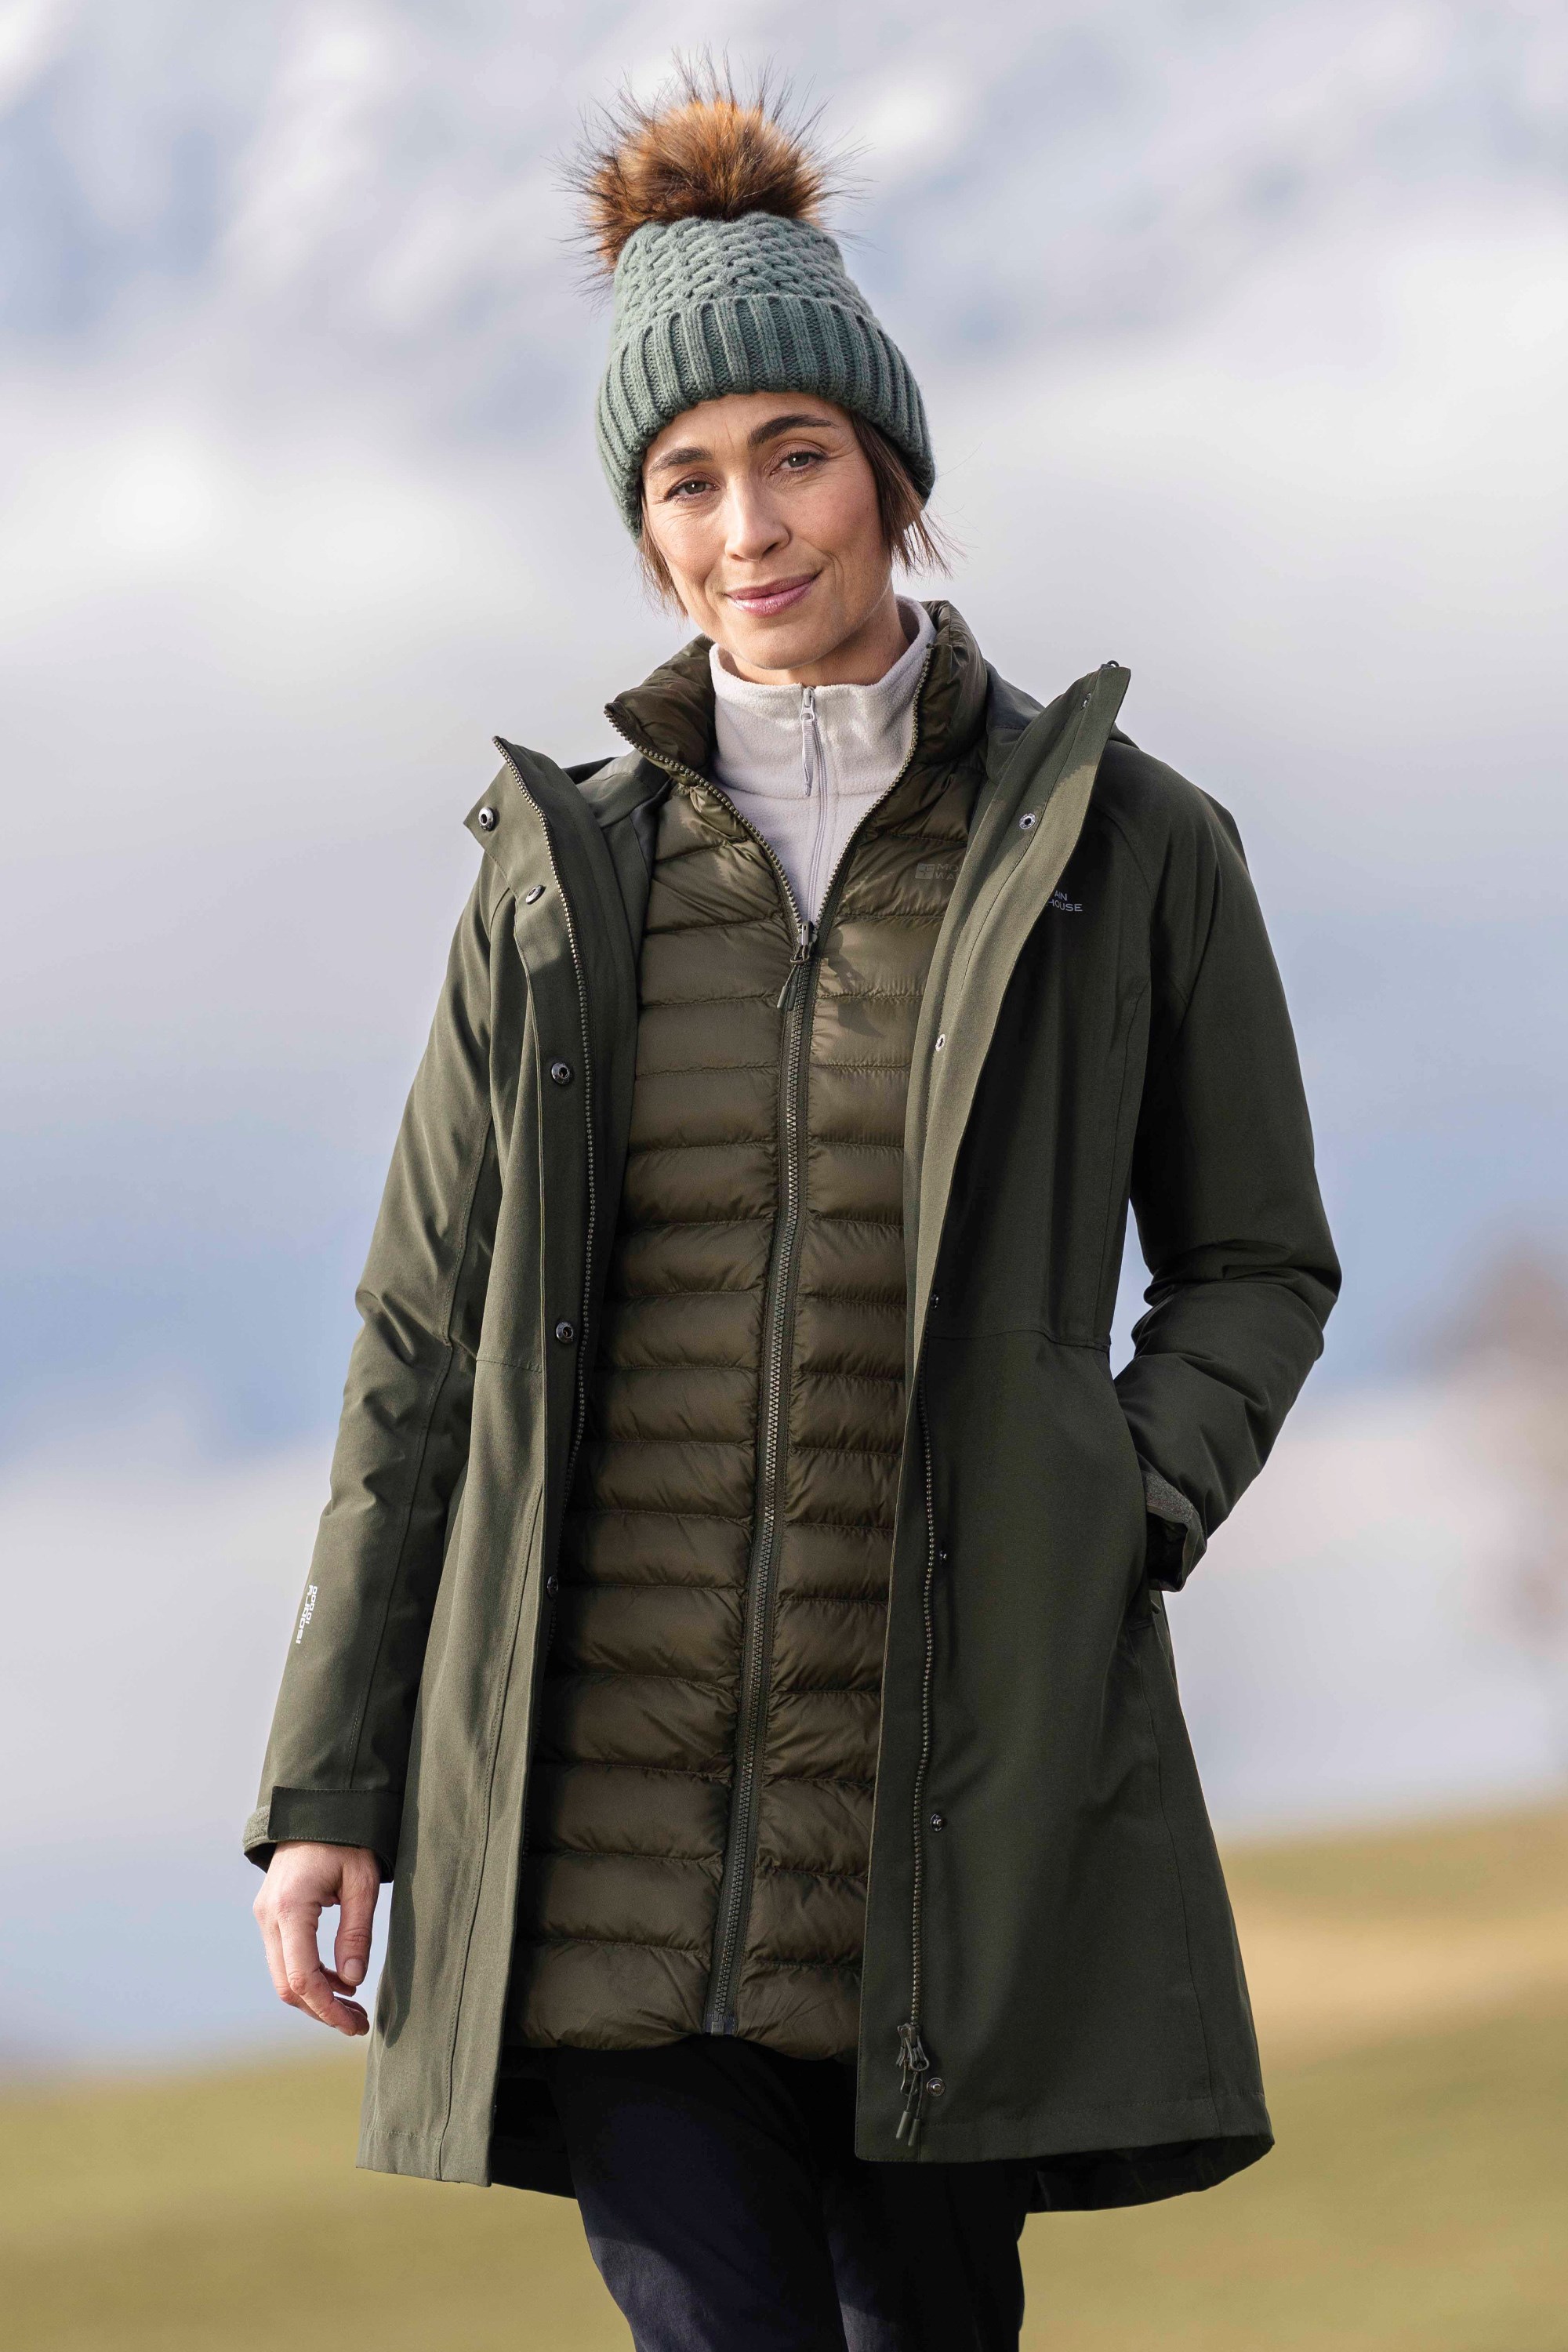 2XL Outerwear & Jackets for Women: Buy 2XL Women's Outerwear & Jackets  Online at Low Prices on Snapdeal.com